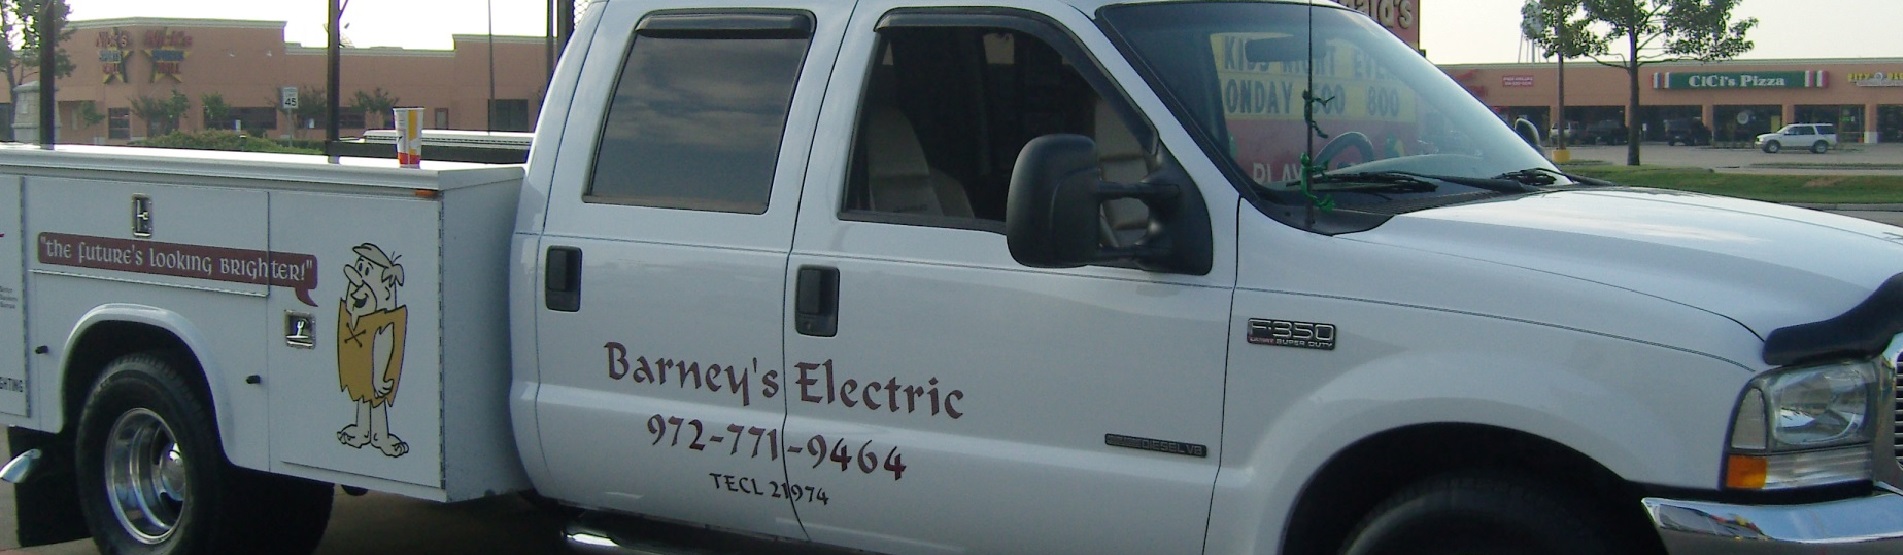 electrical contractor Rowlett texas Electrician Rowlett TX Barney's Electric Full Service Electrician Residential Commercial Retail and New Construction Wiring Repair Installation Service 24 Hour Emergency Services Master Electrician Rockwall Texas